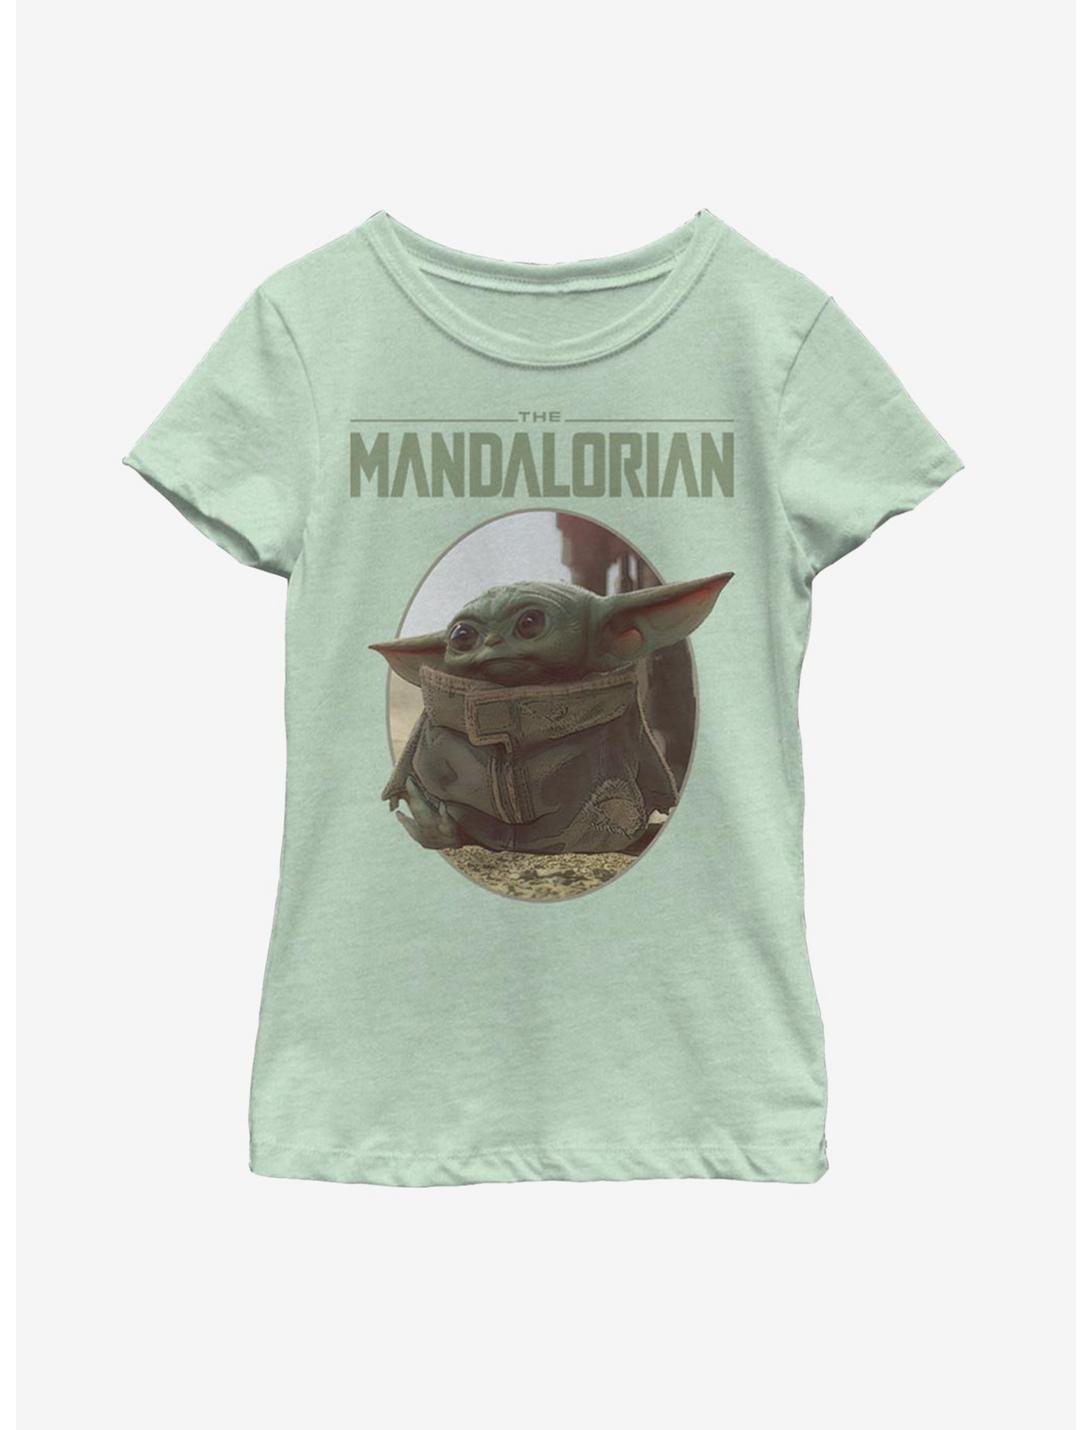 Star Wars The Mandalorian The Child Cute Look Youth Girls T-Shirt, MINT, hi-res